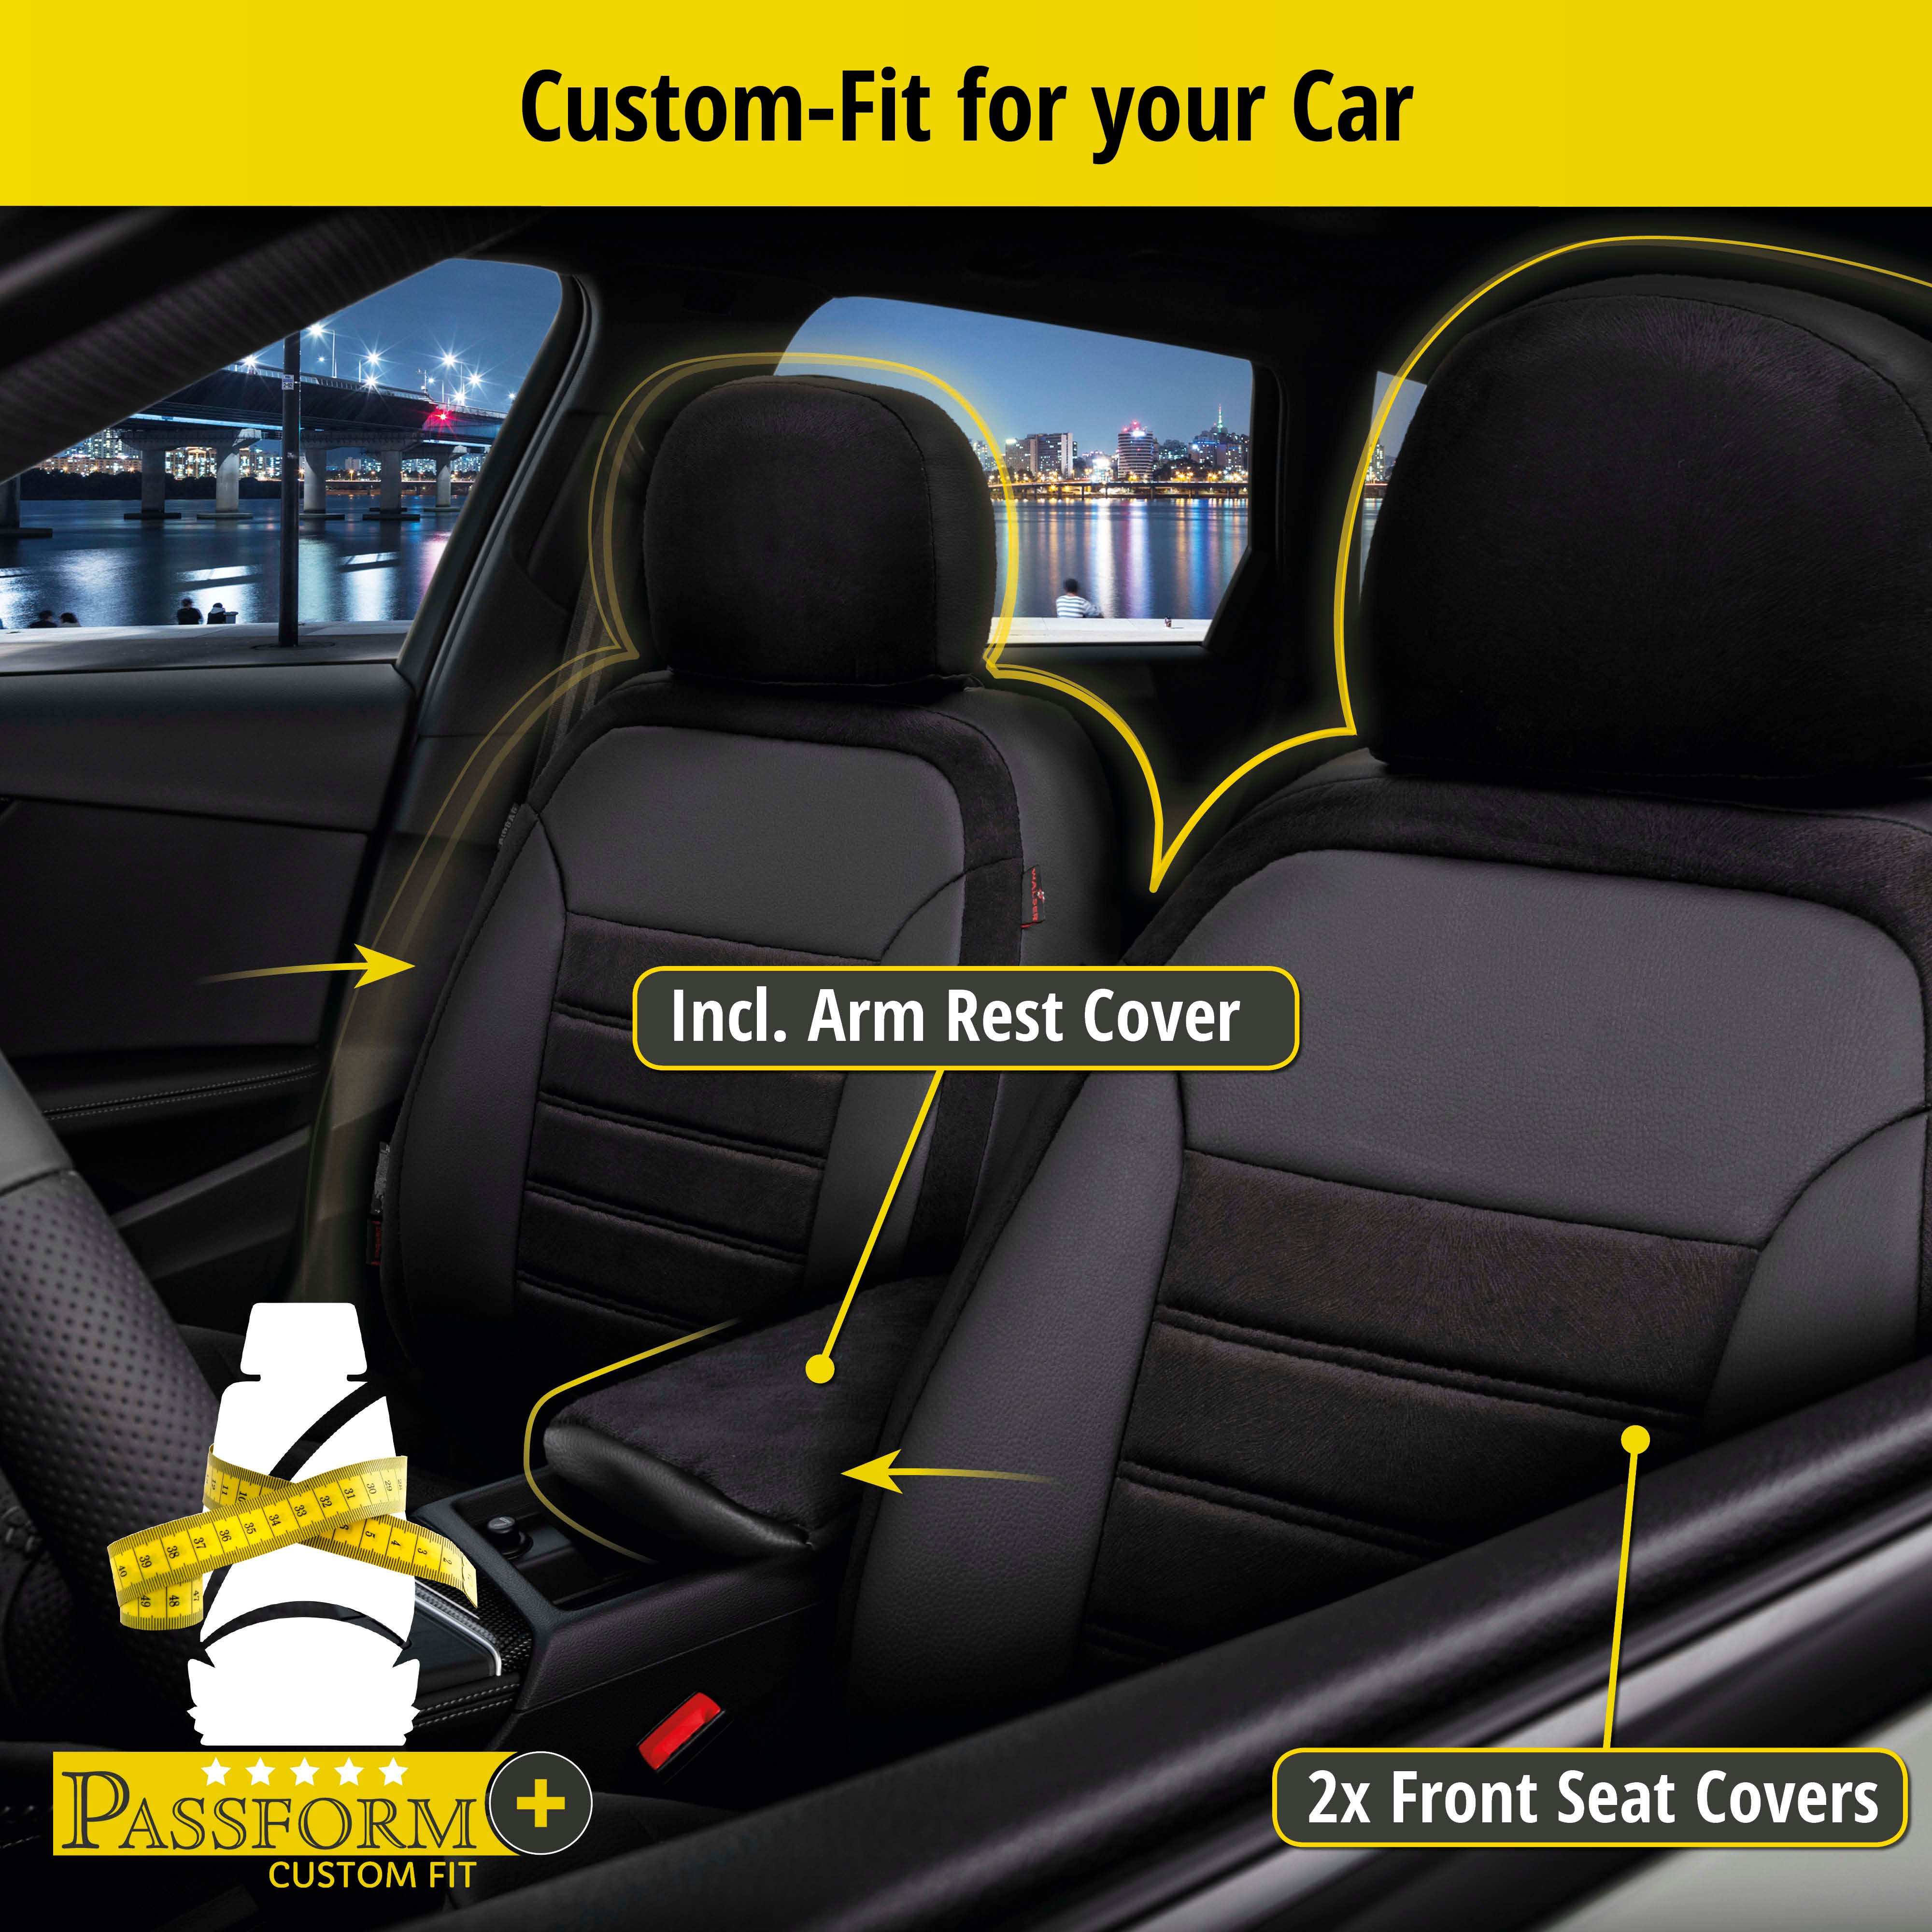 Seat Cover Bari for Ford Focus 2012-Today, 2 seat covers for normal seats